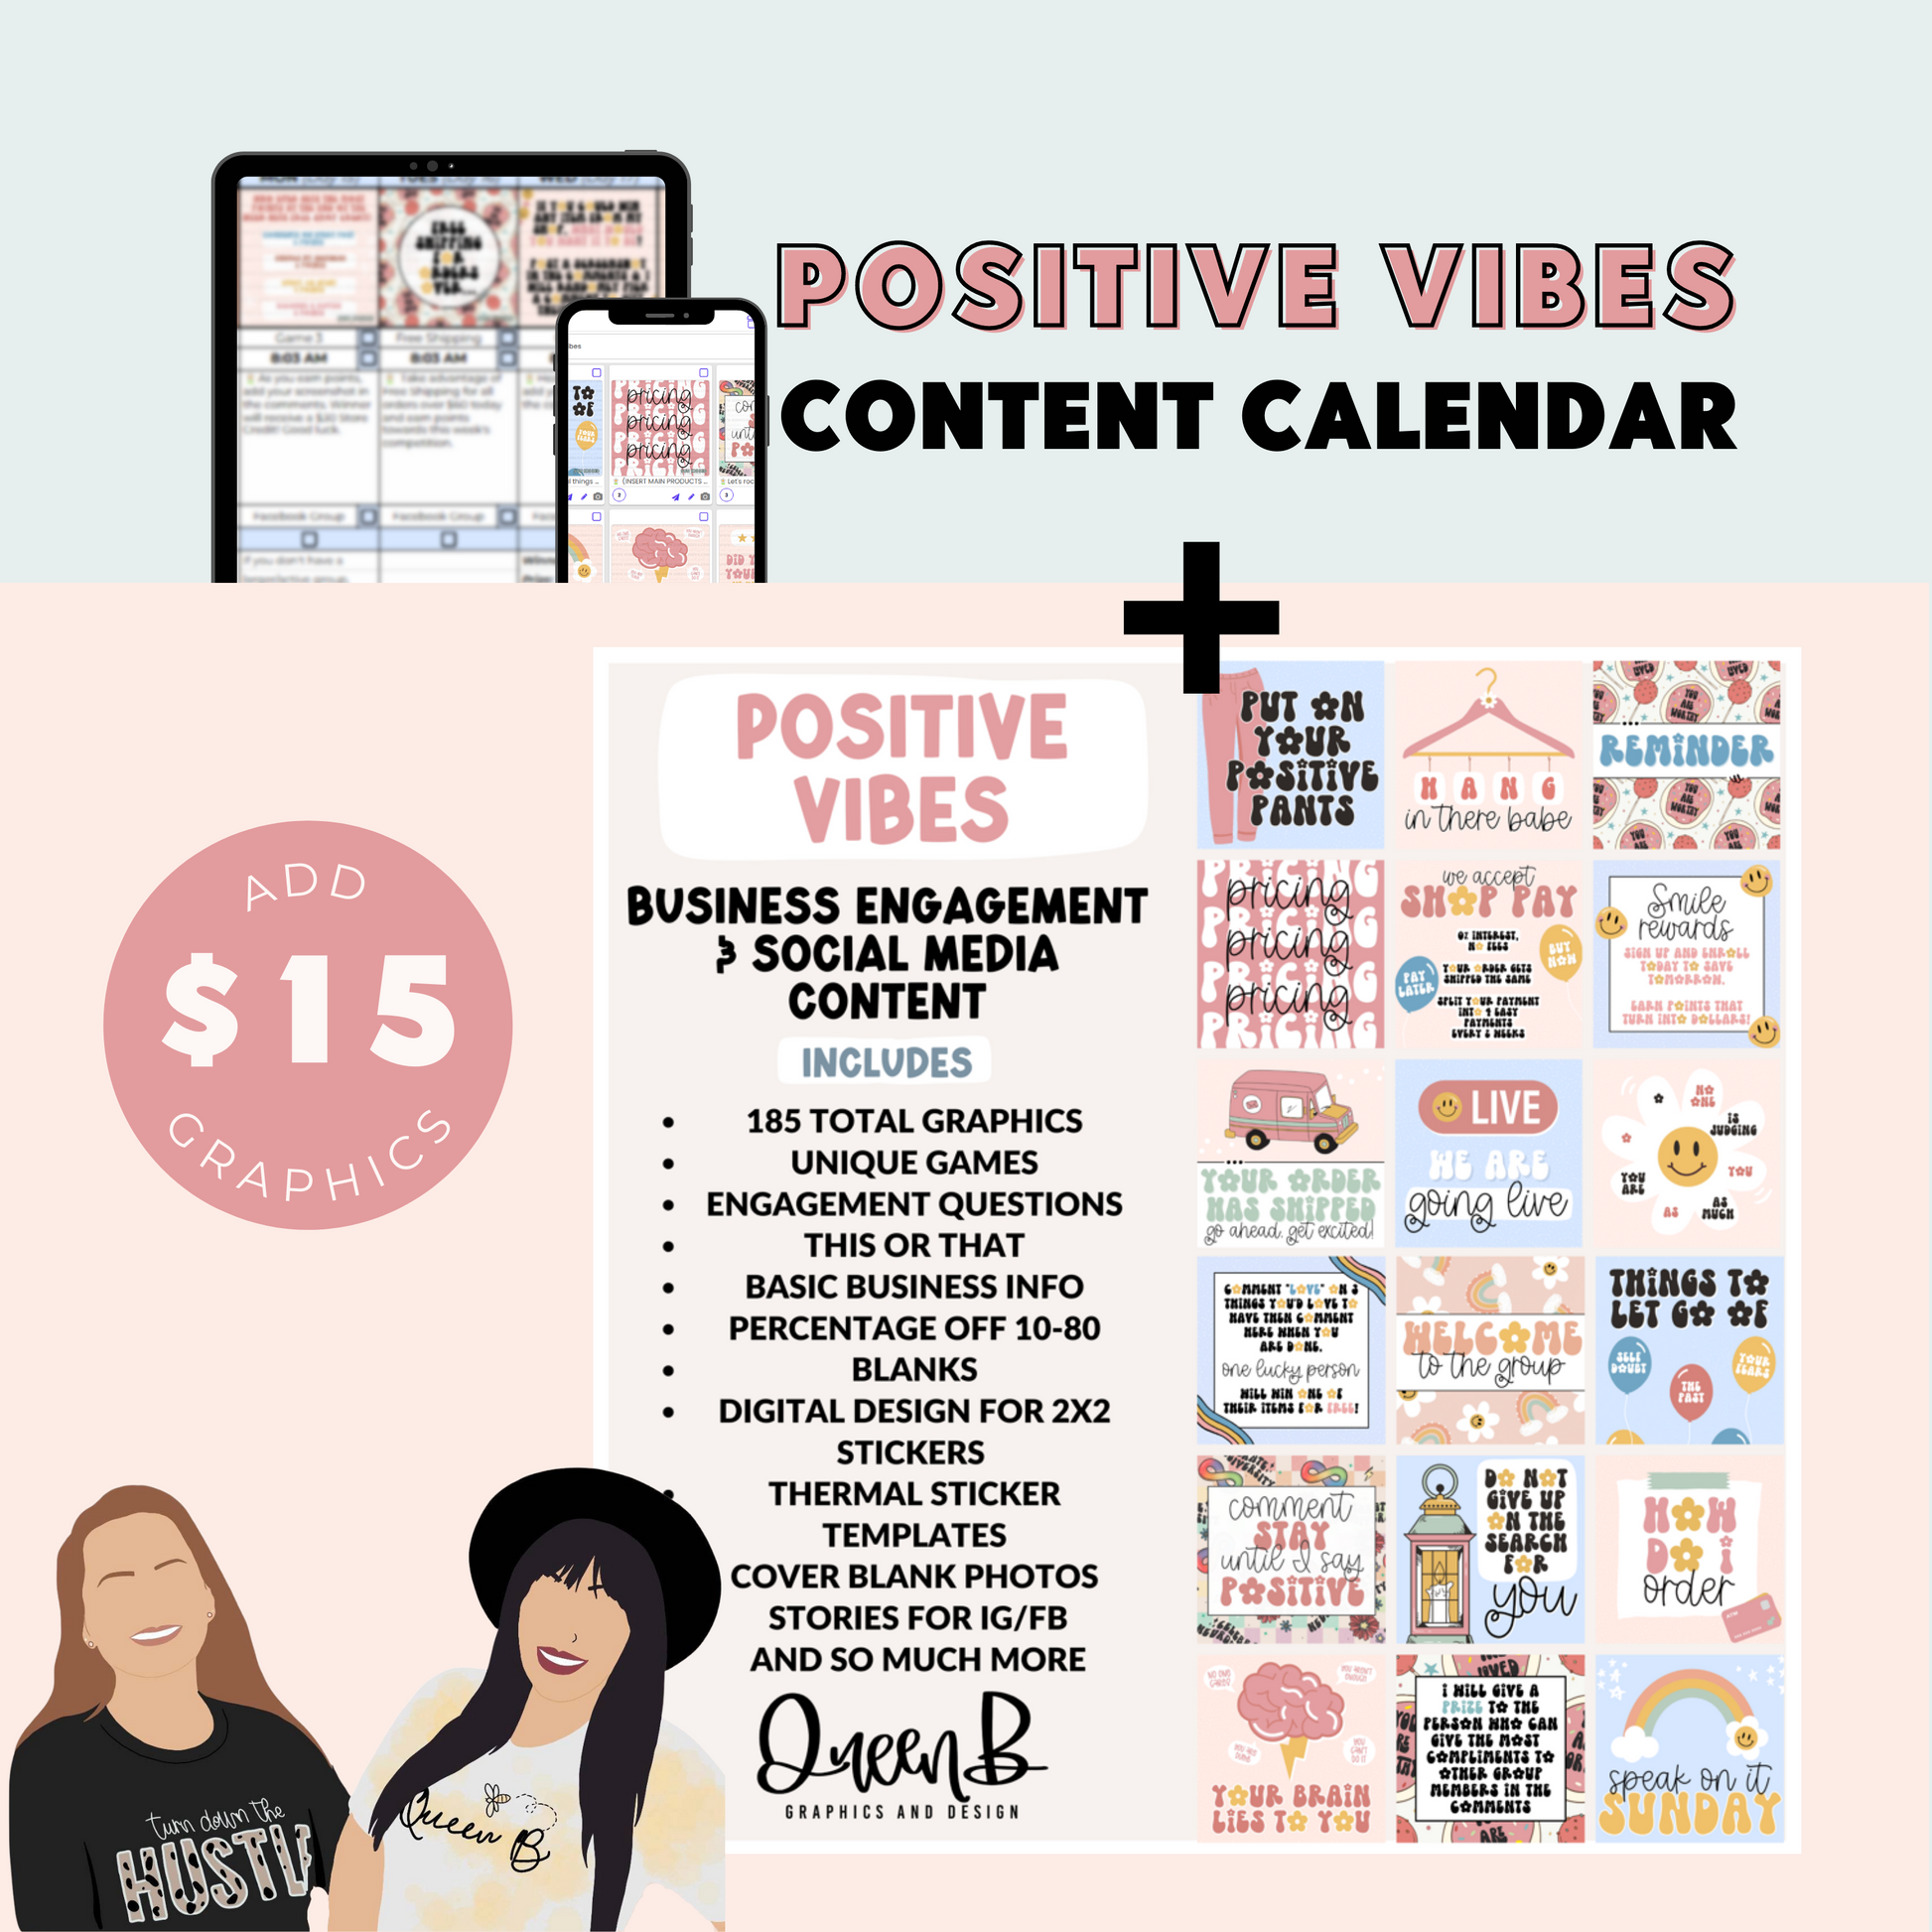 Positive Vibes Content Calendar to connect with your audience right where they are | Sun Kissed Virtual Assistant